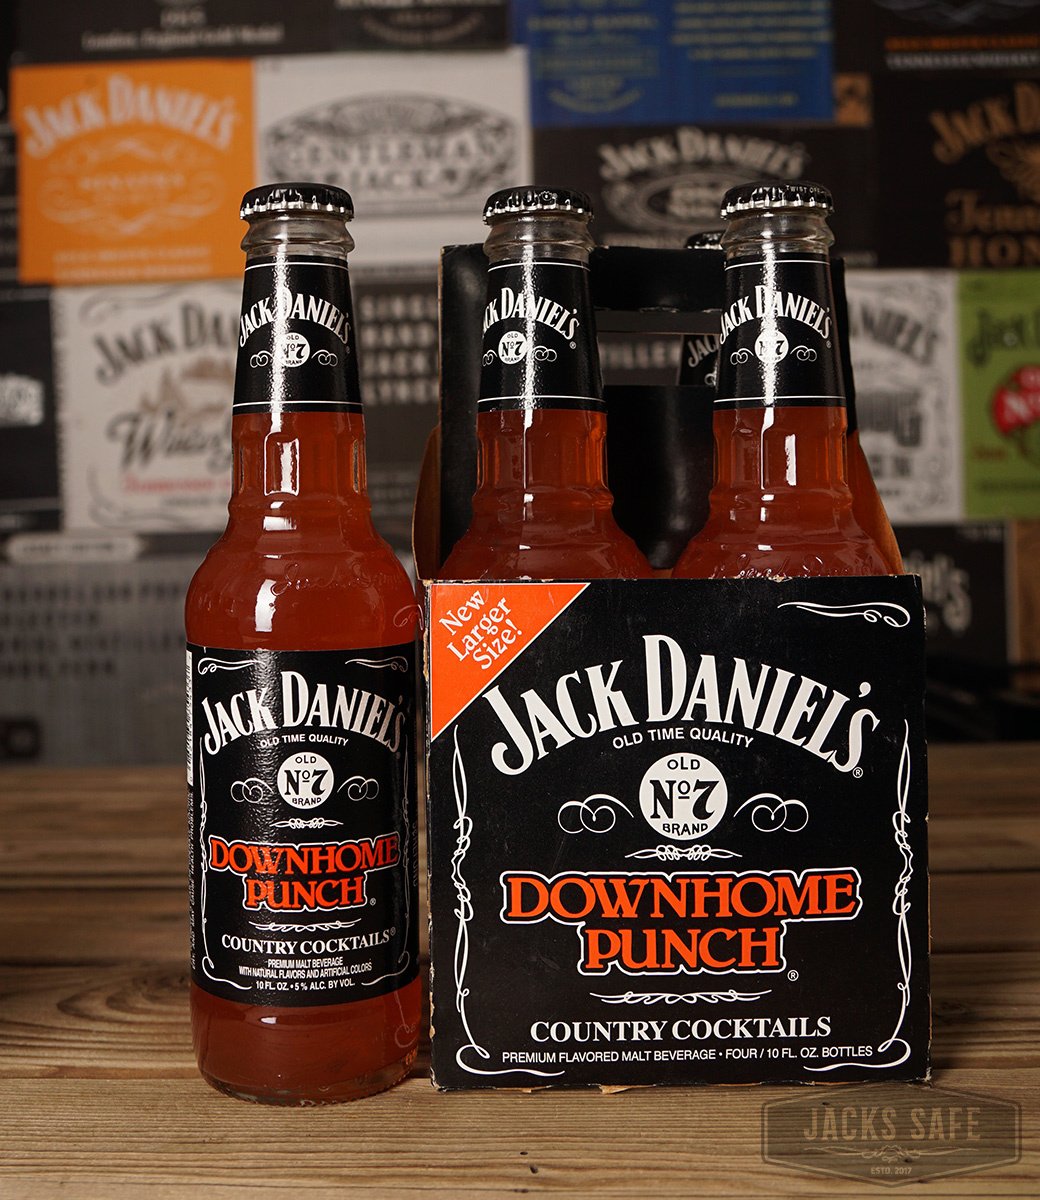 JACK DANIEL'S - Country Cocktails - Downhome Punch - 1 Bottle - SEVERAL OPTIONS